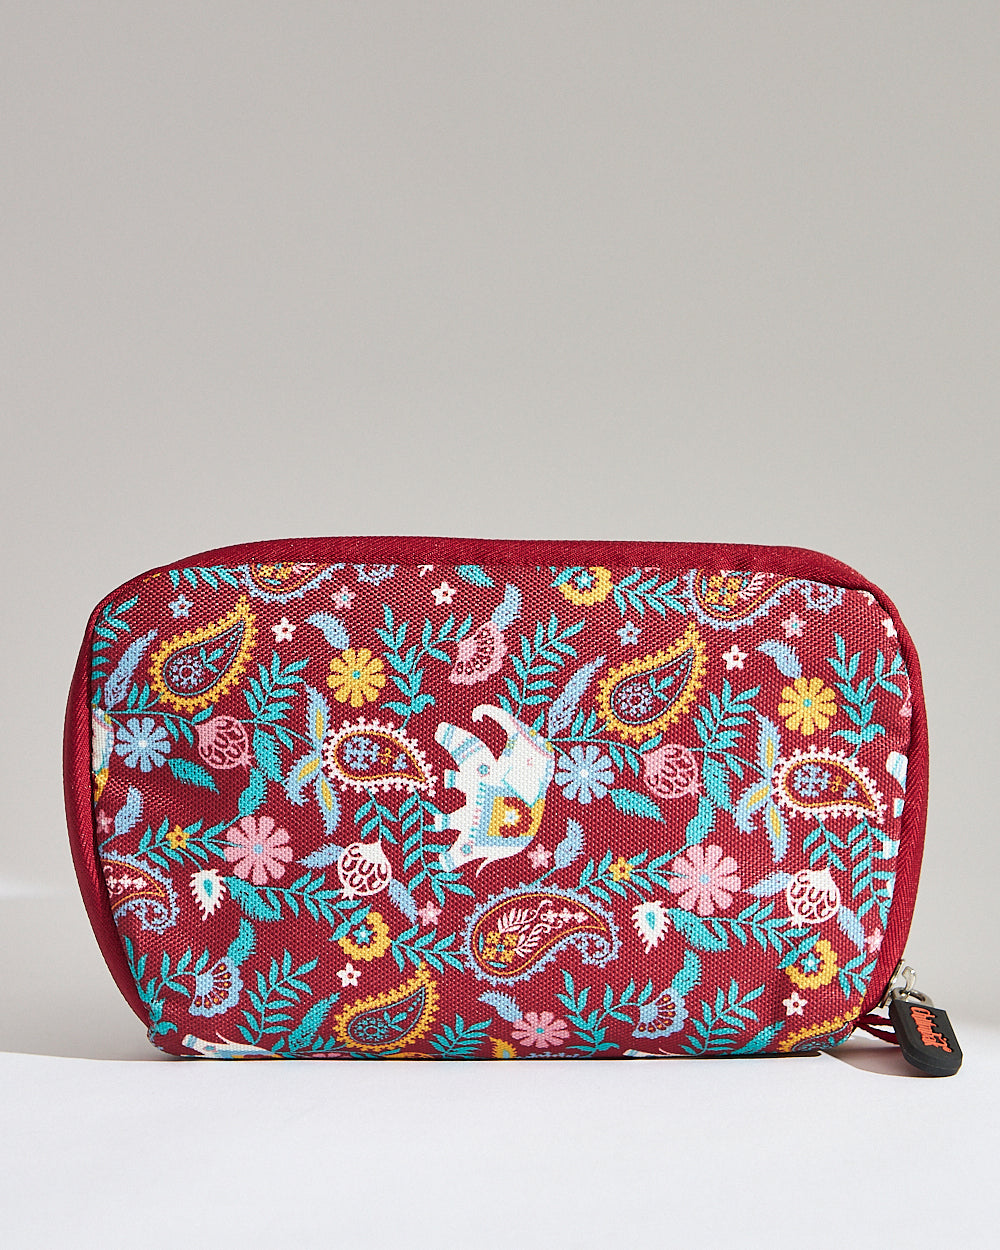 15 inch Laptop Sleeve | Paisley Tusker